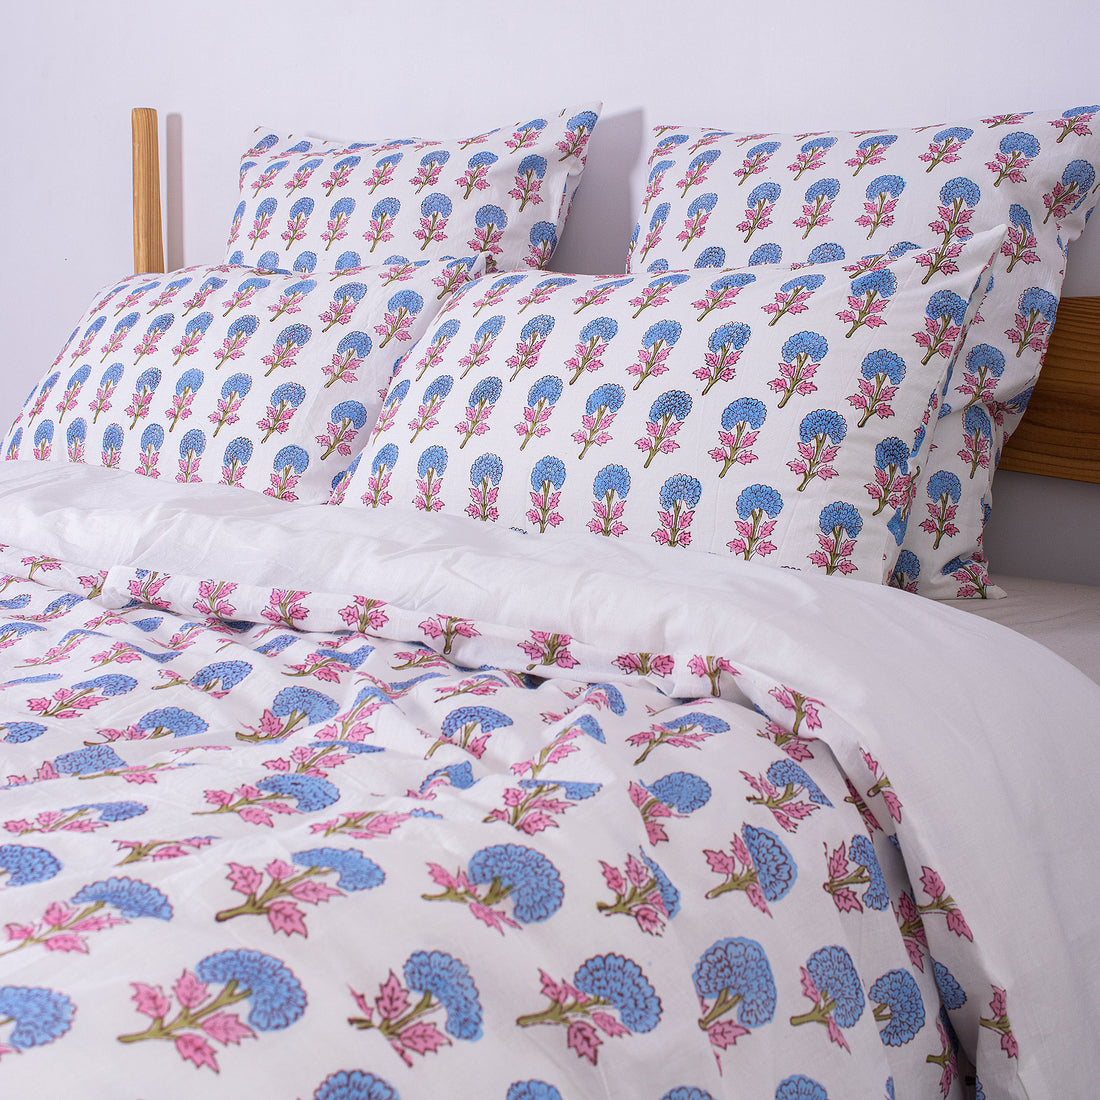 Palm Tree Printed Cotton Duvet Cover With Shams